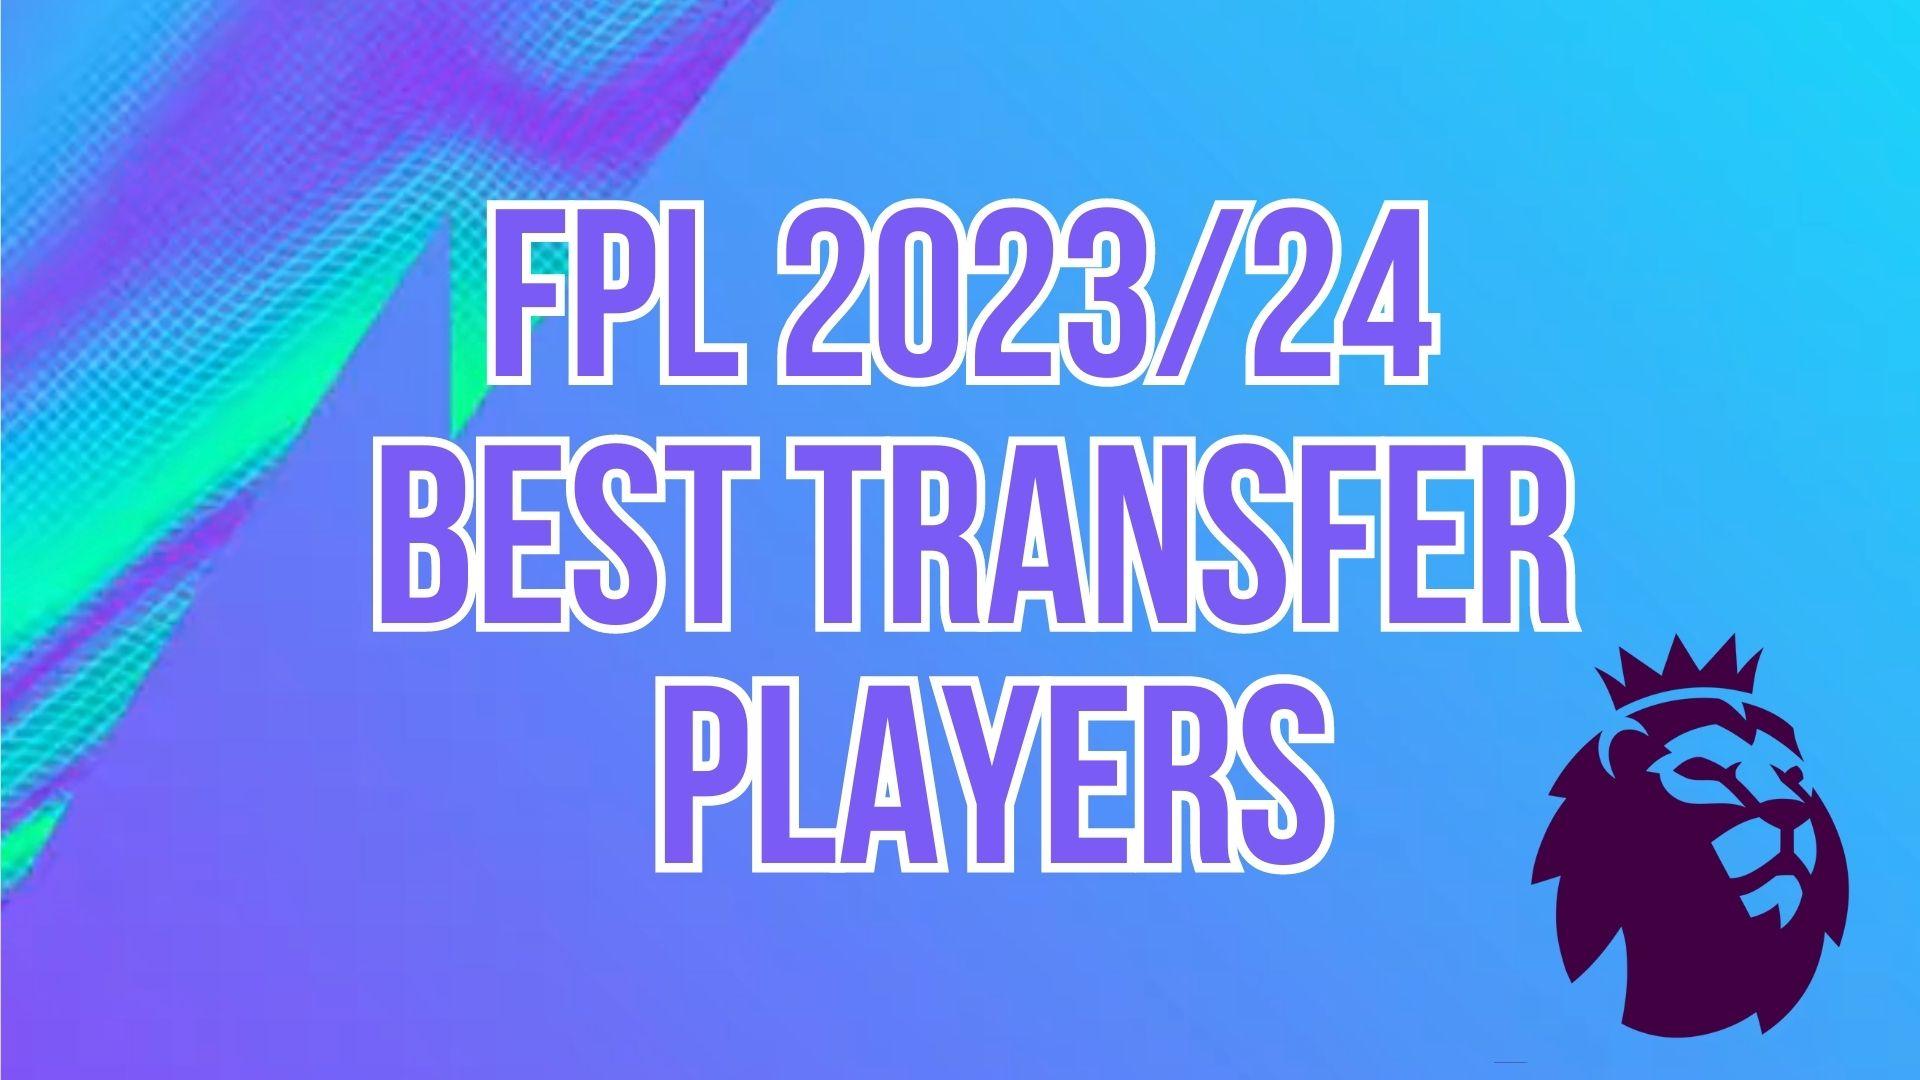 Fantasy premier league 2023/24 text with logo and best transfer players